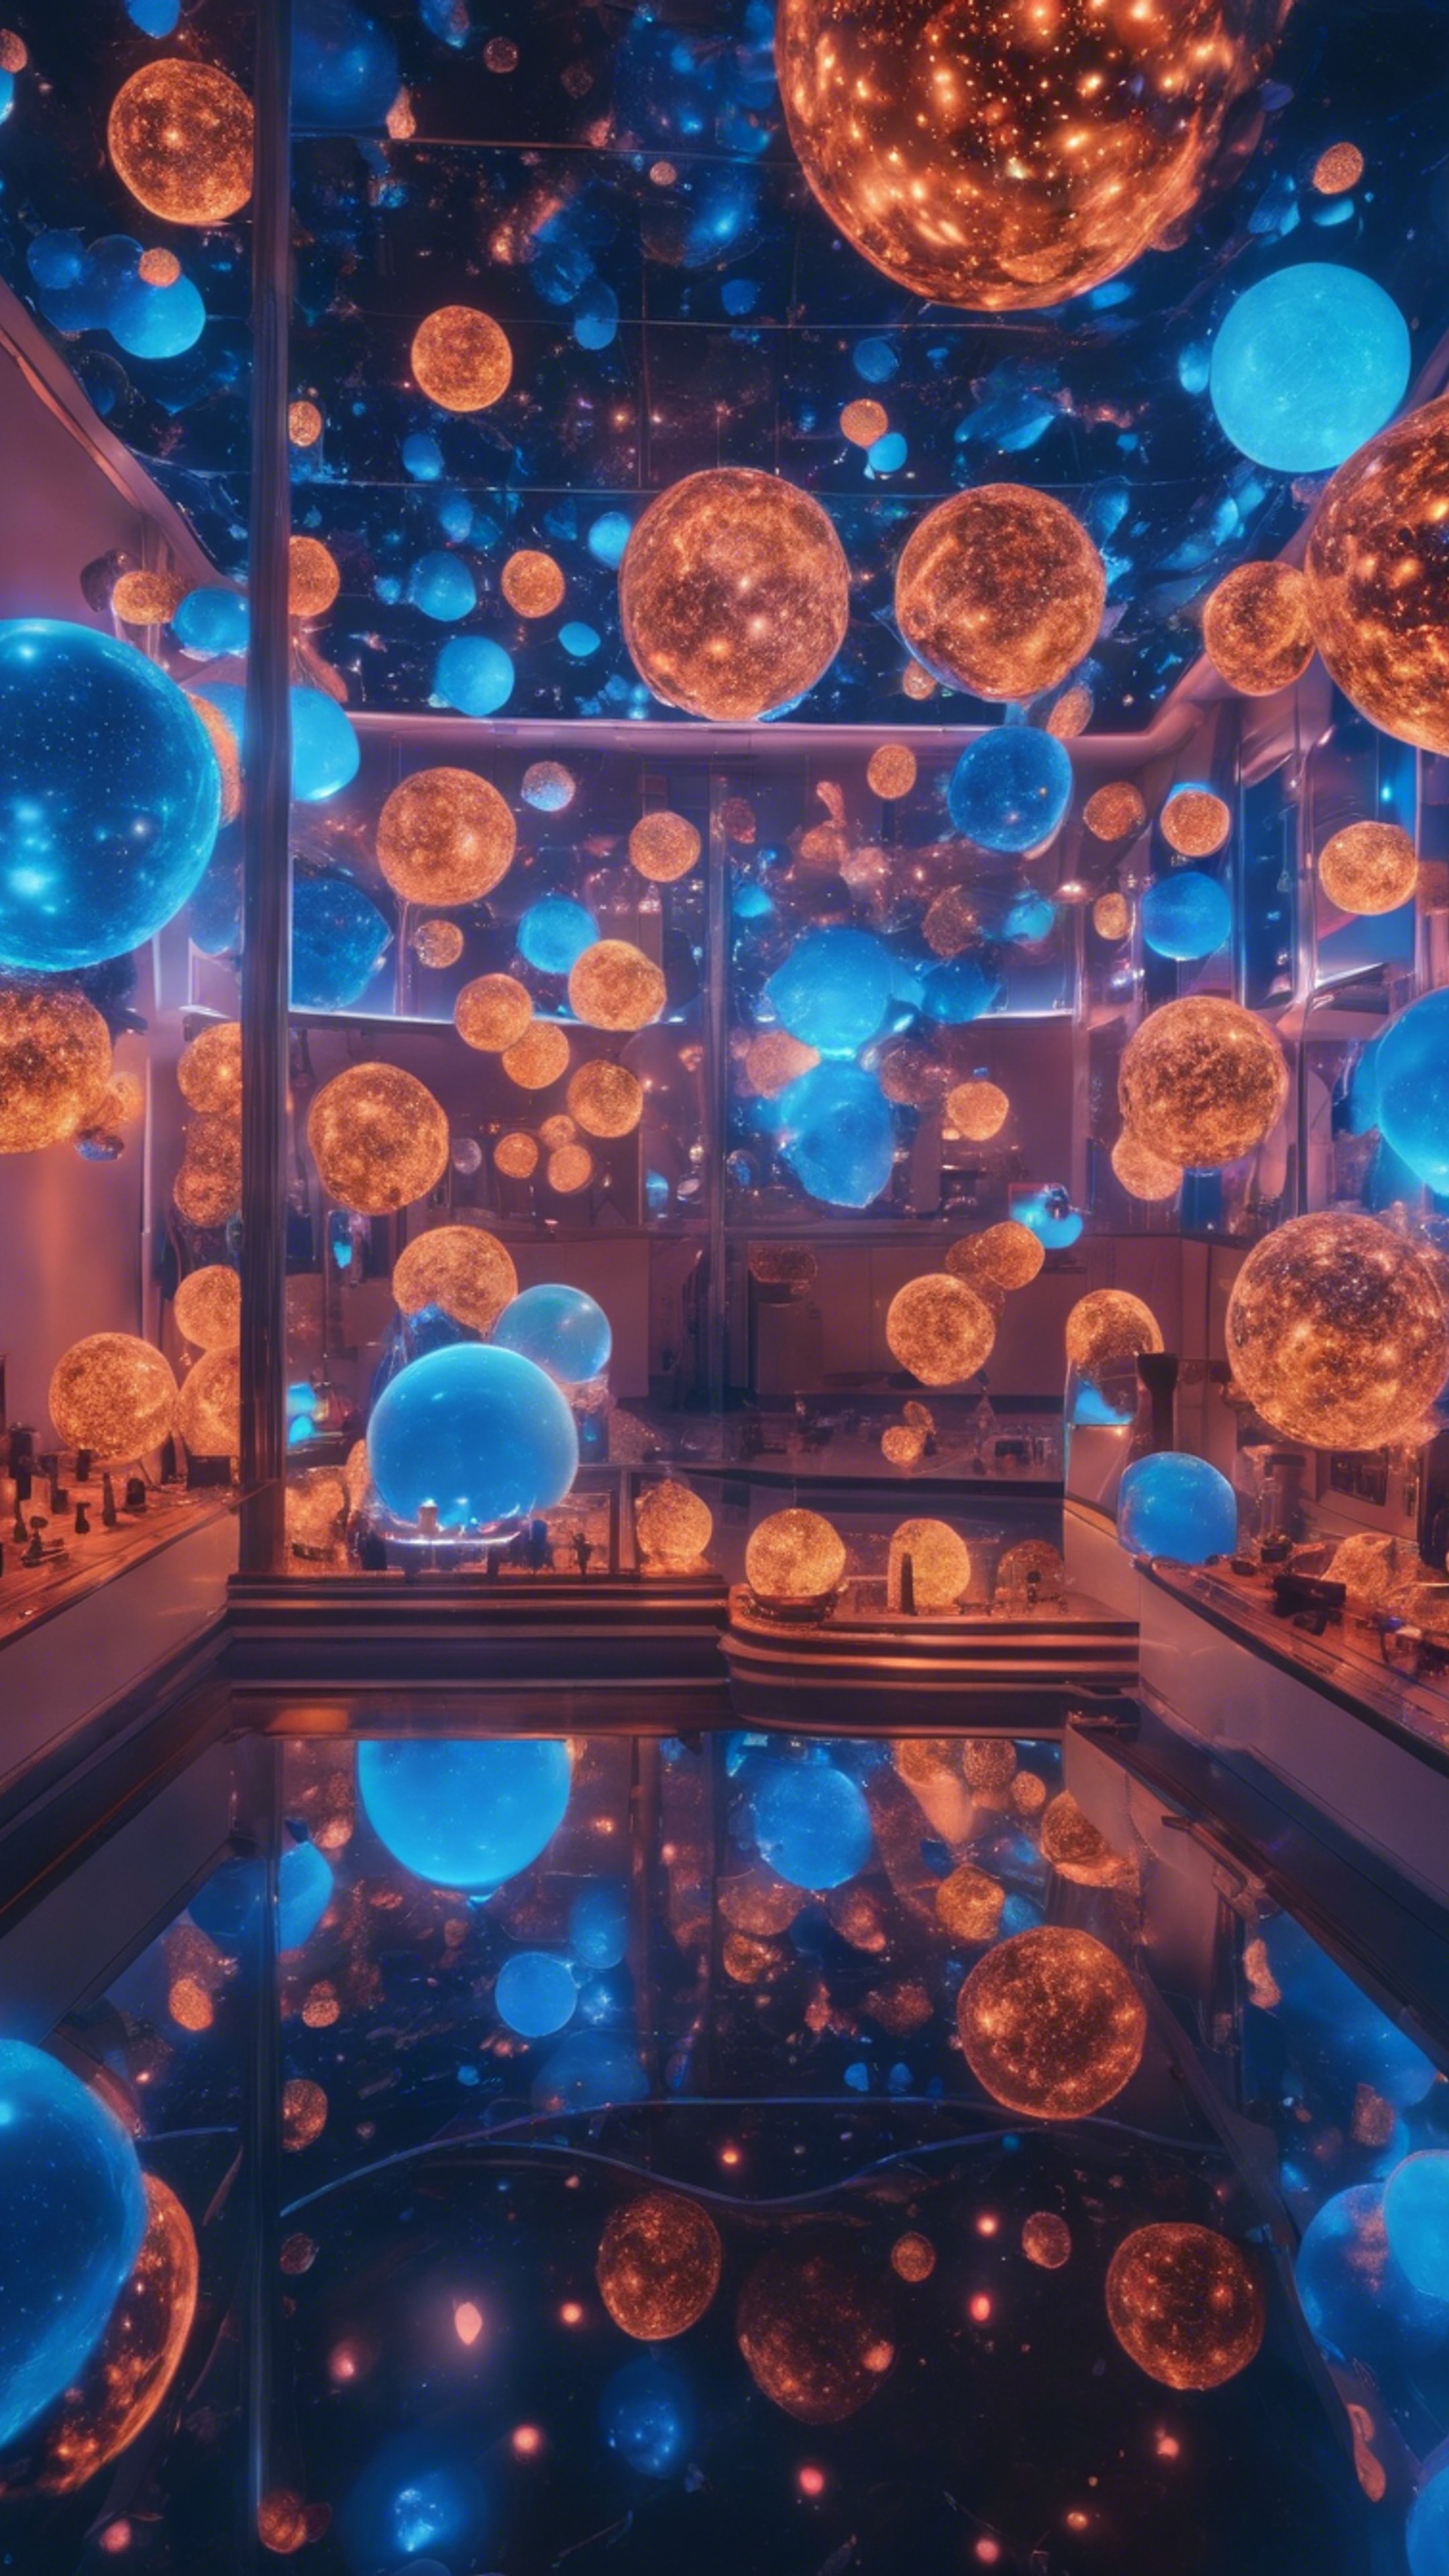 A surreal, neon blue museum in space, filled with floating orbs.壁紙[35e461307c264e14b812]